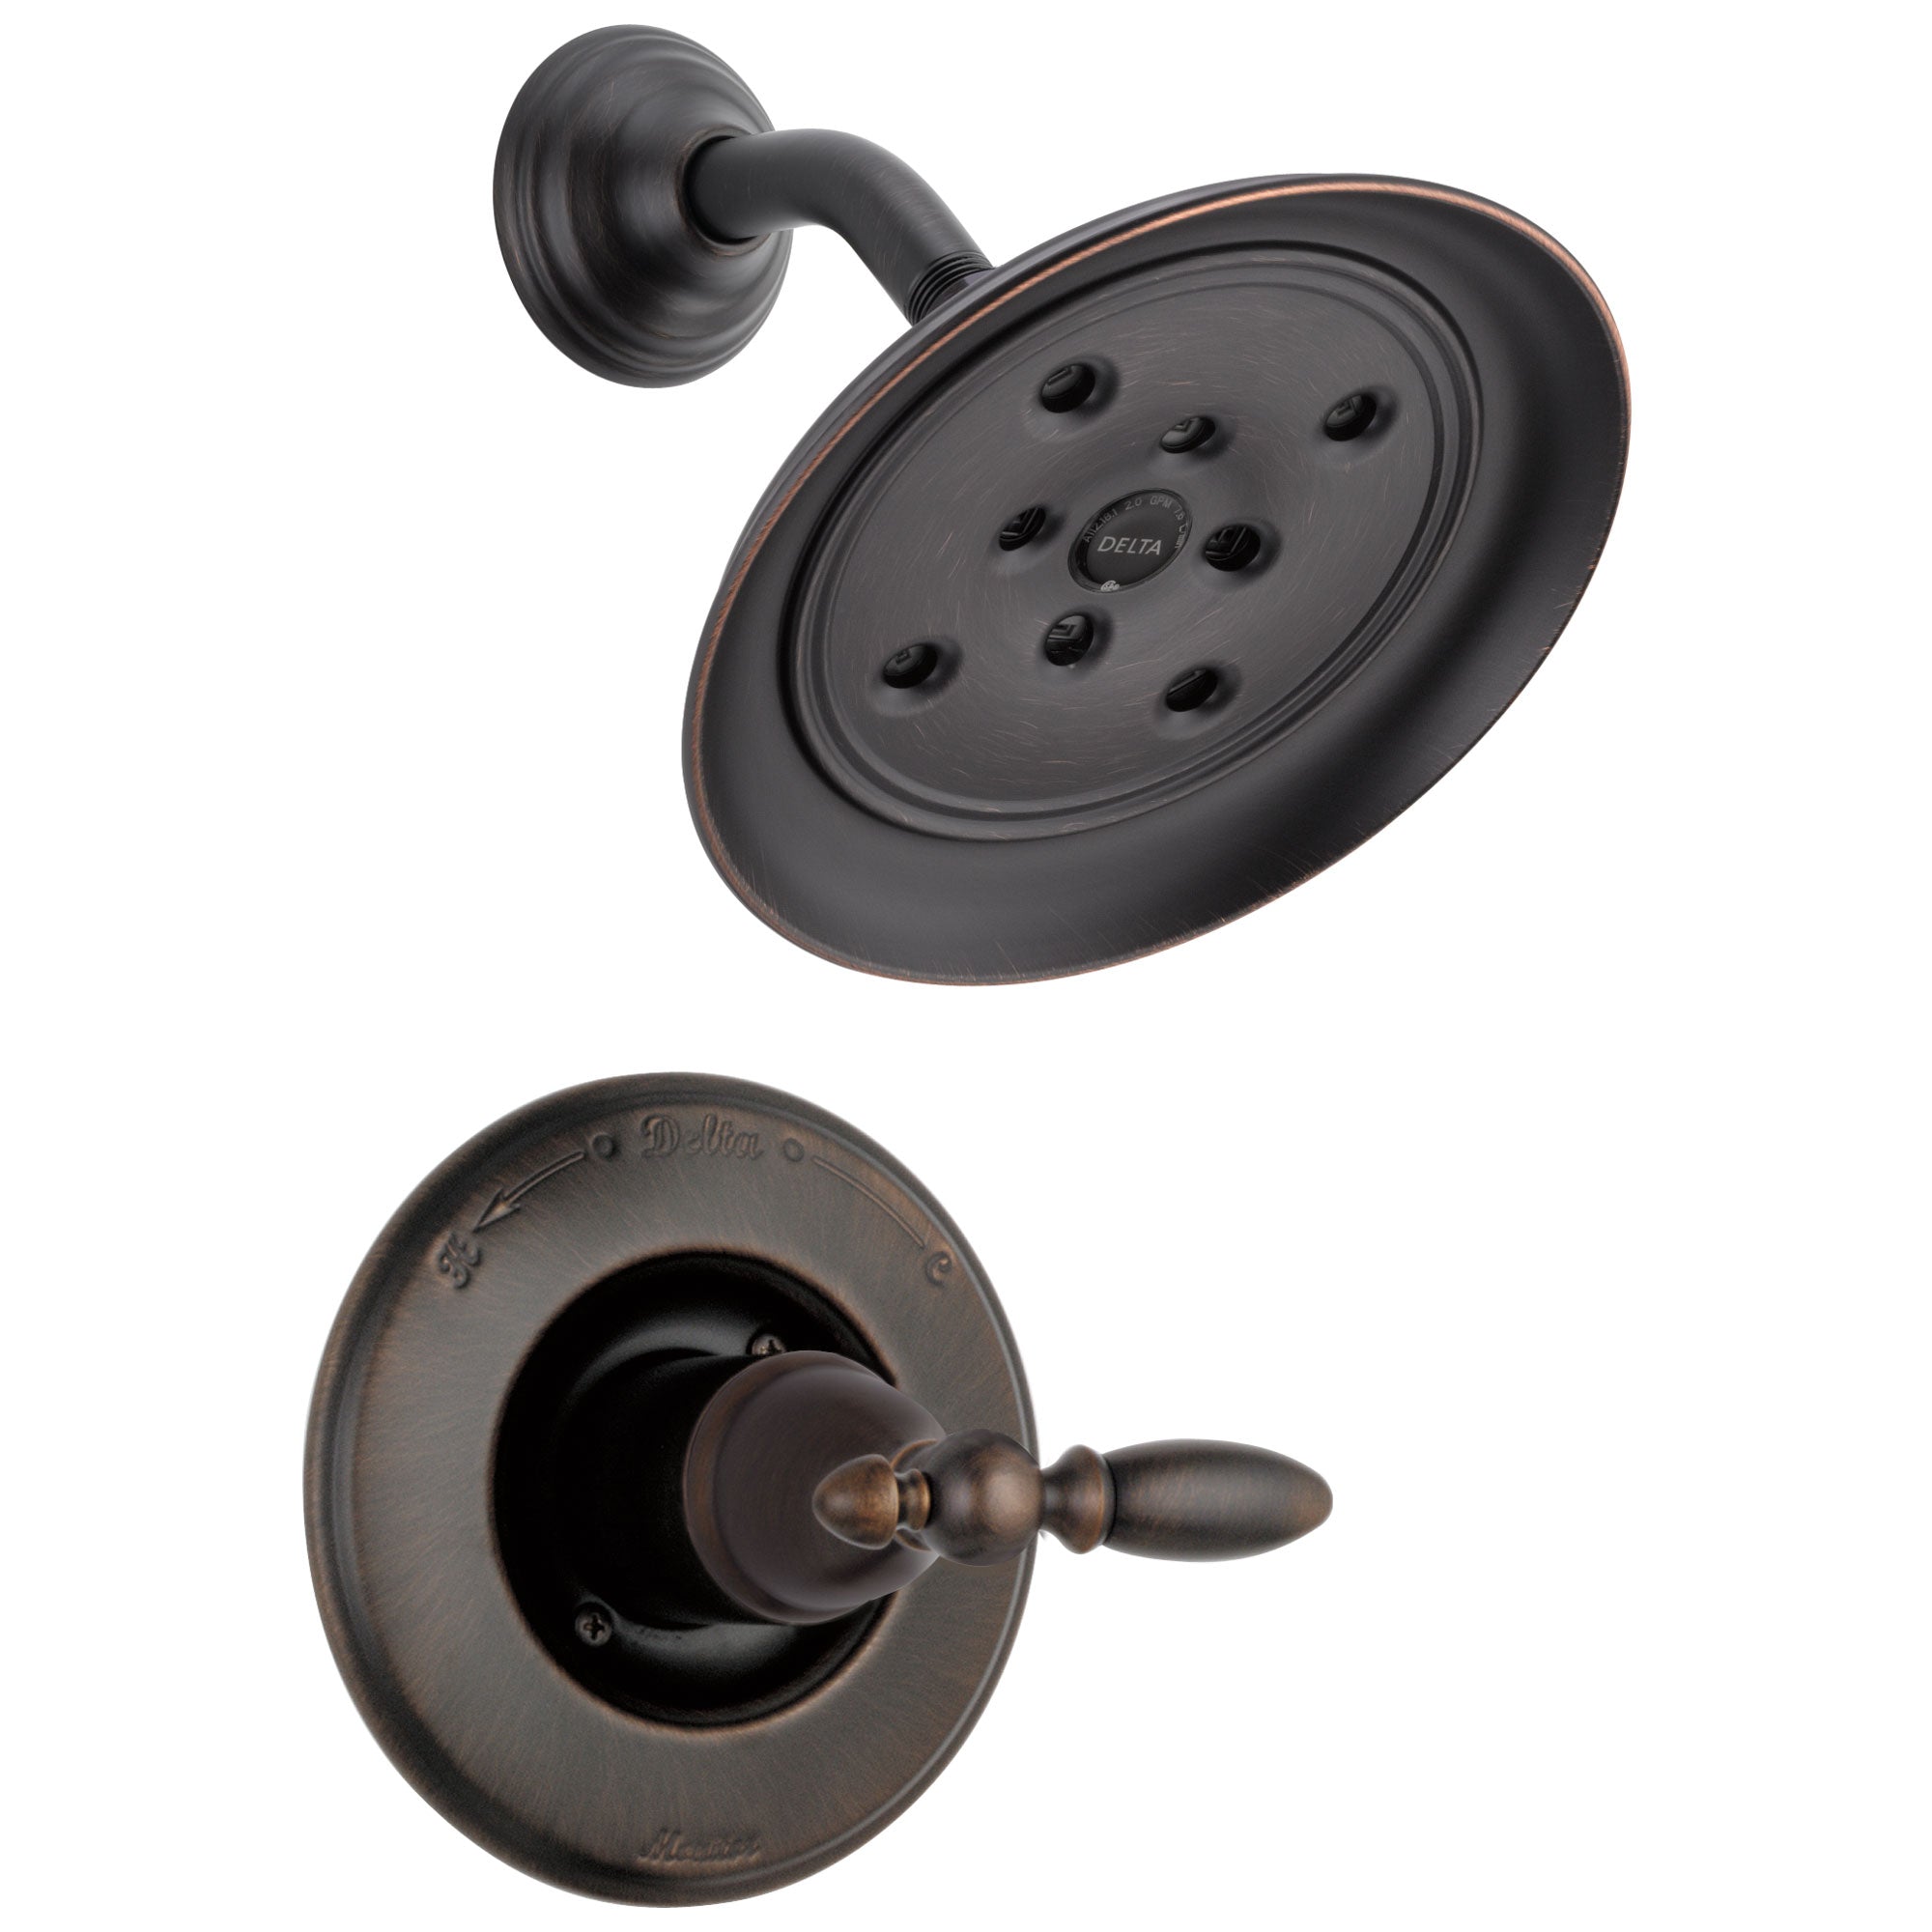 Delta Victorian Collection Venetian Bronze Traditional Style Monitor 14 Shower Faucet INCLUDES Single Lever Handle and Rough-Valve without Stops D1560V